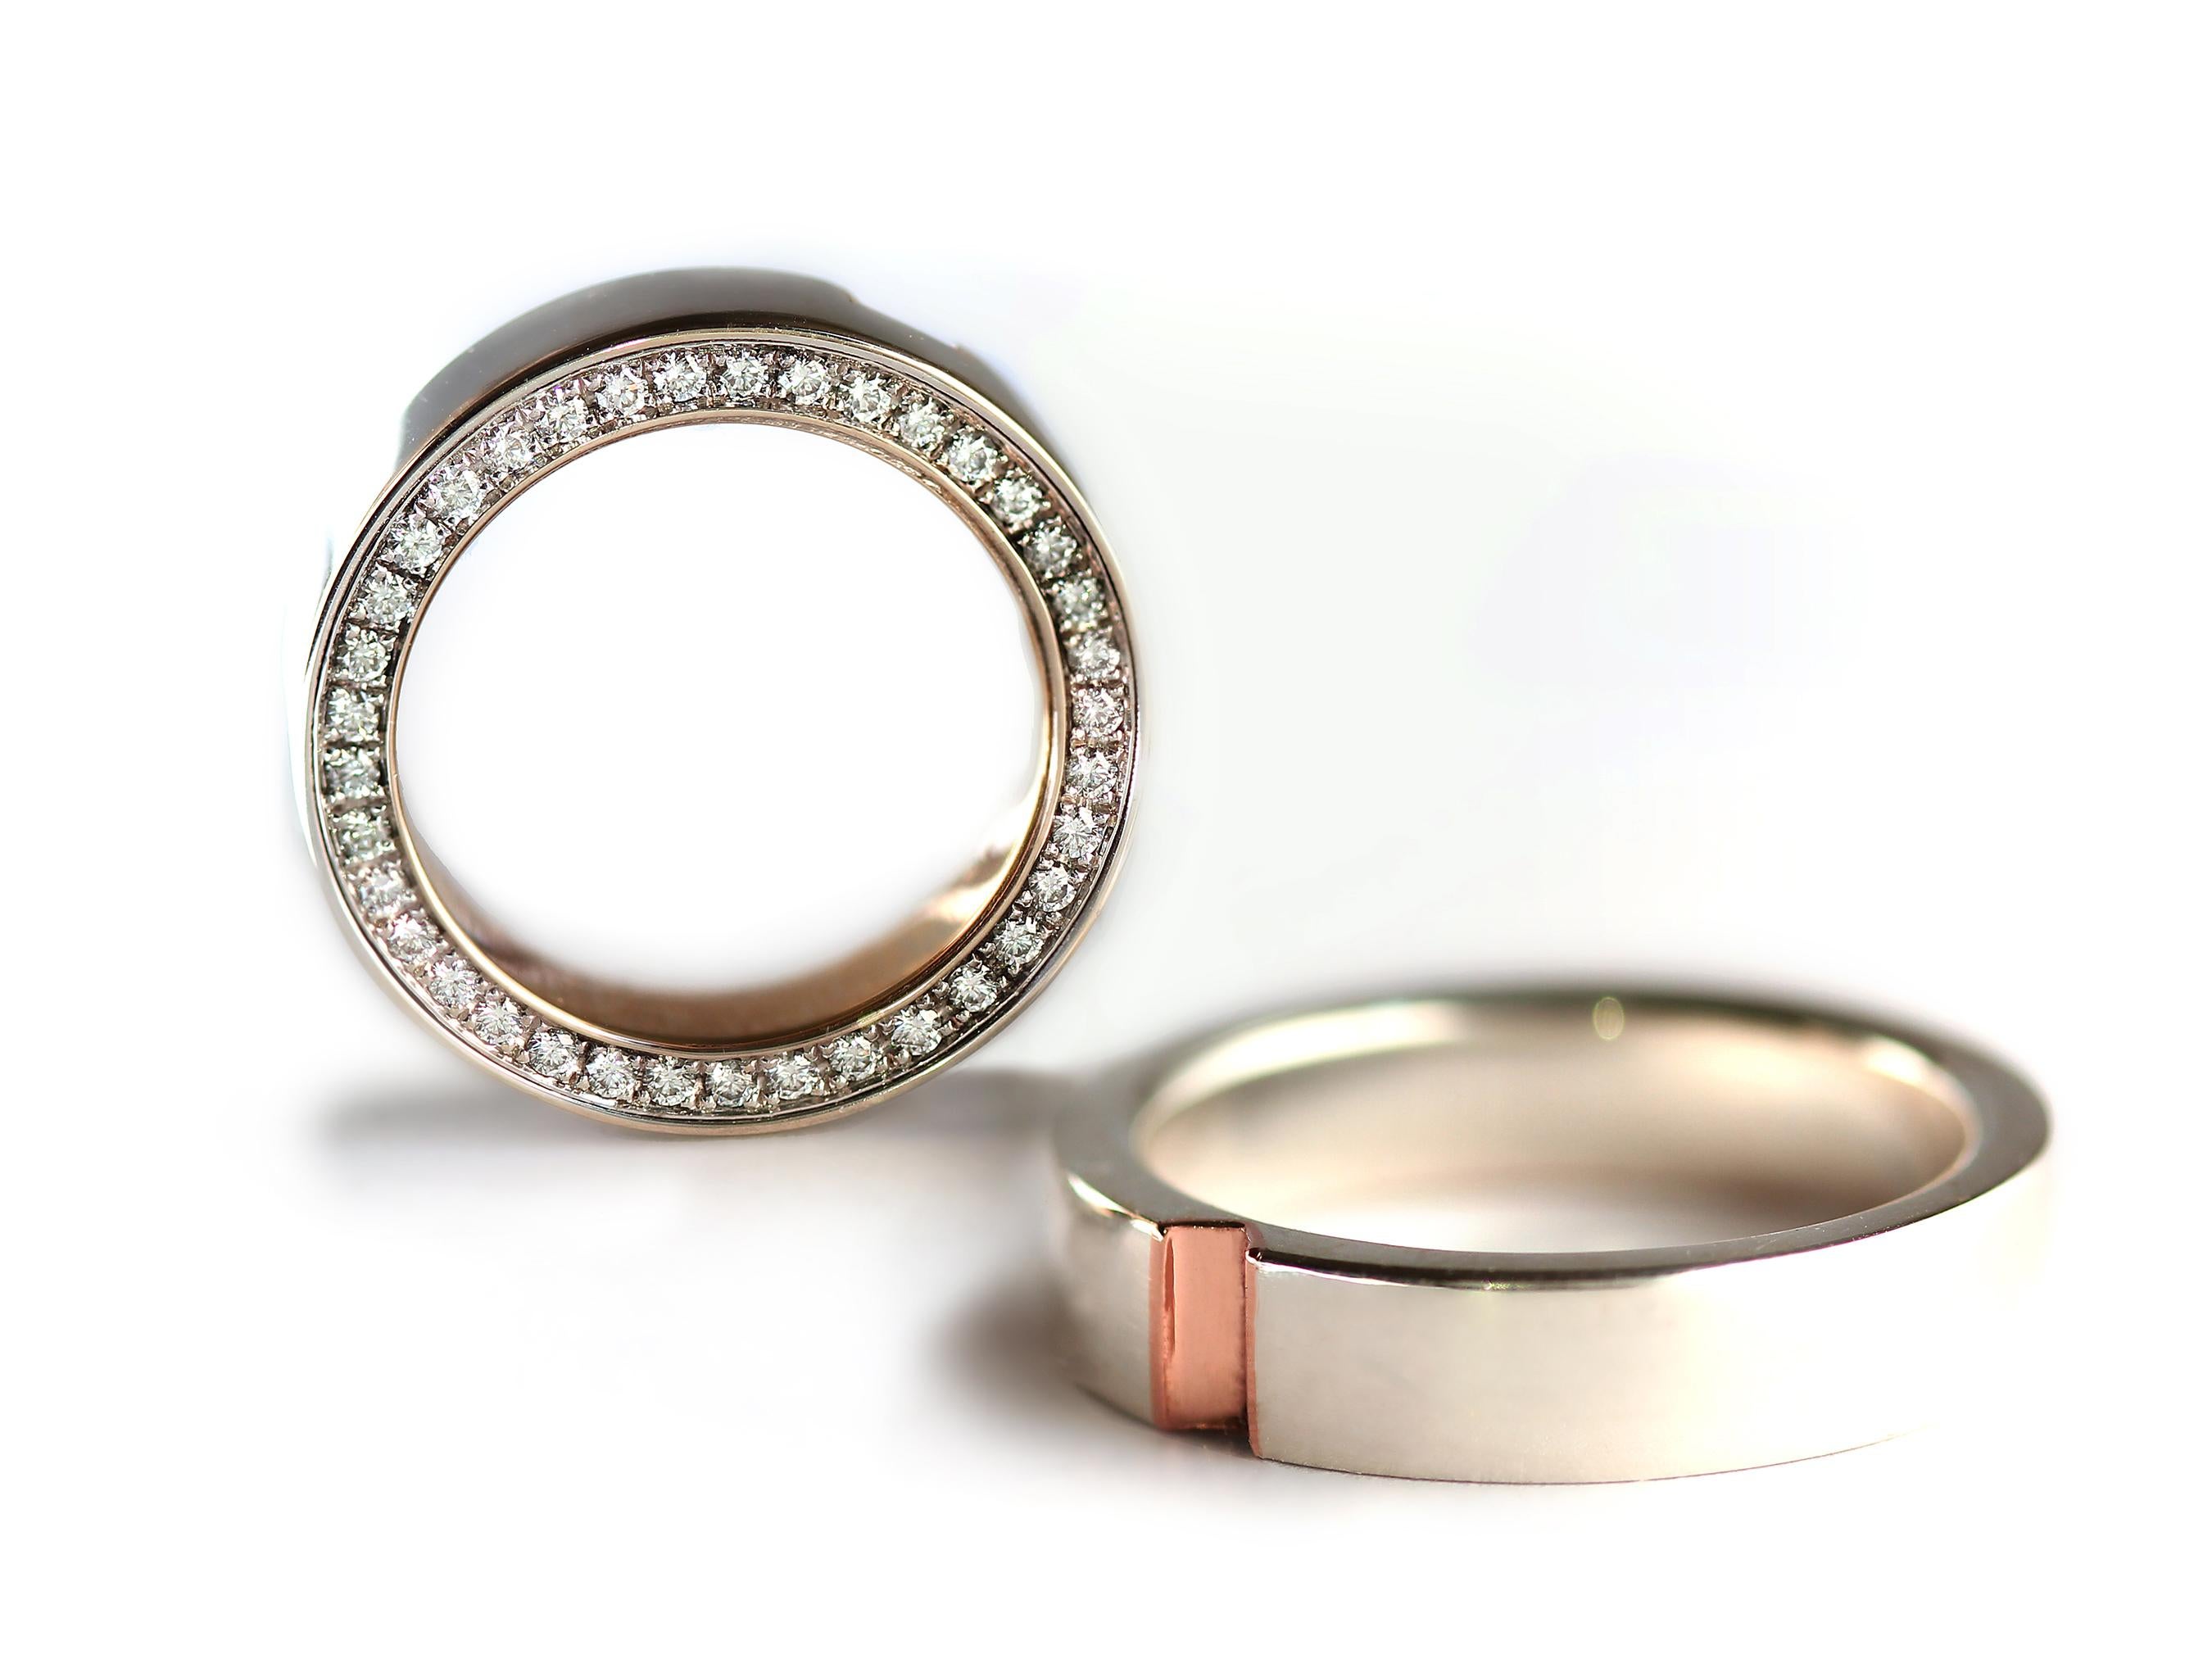 For Sale:  Eternity Ring Set, Diamond Wedding Band, Promise Rings For Couples, Pave Diamond 4